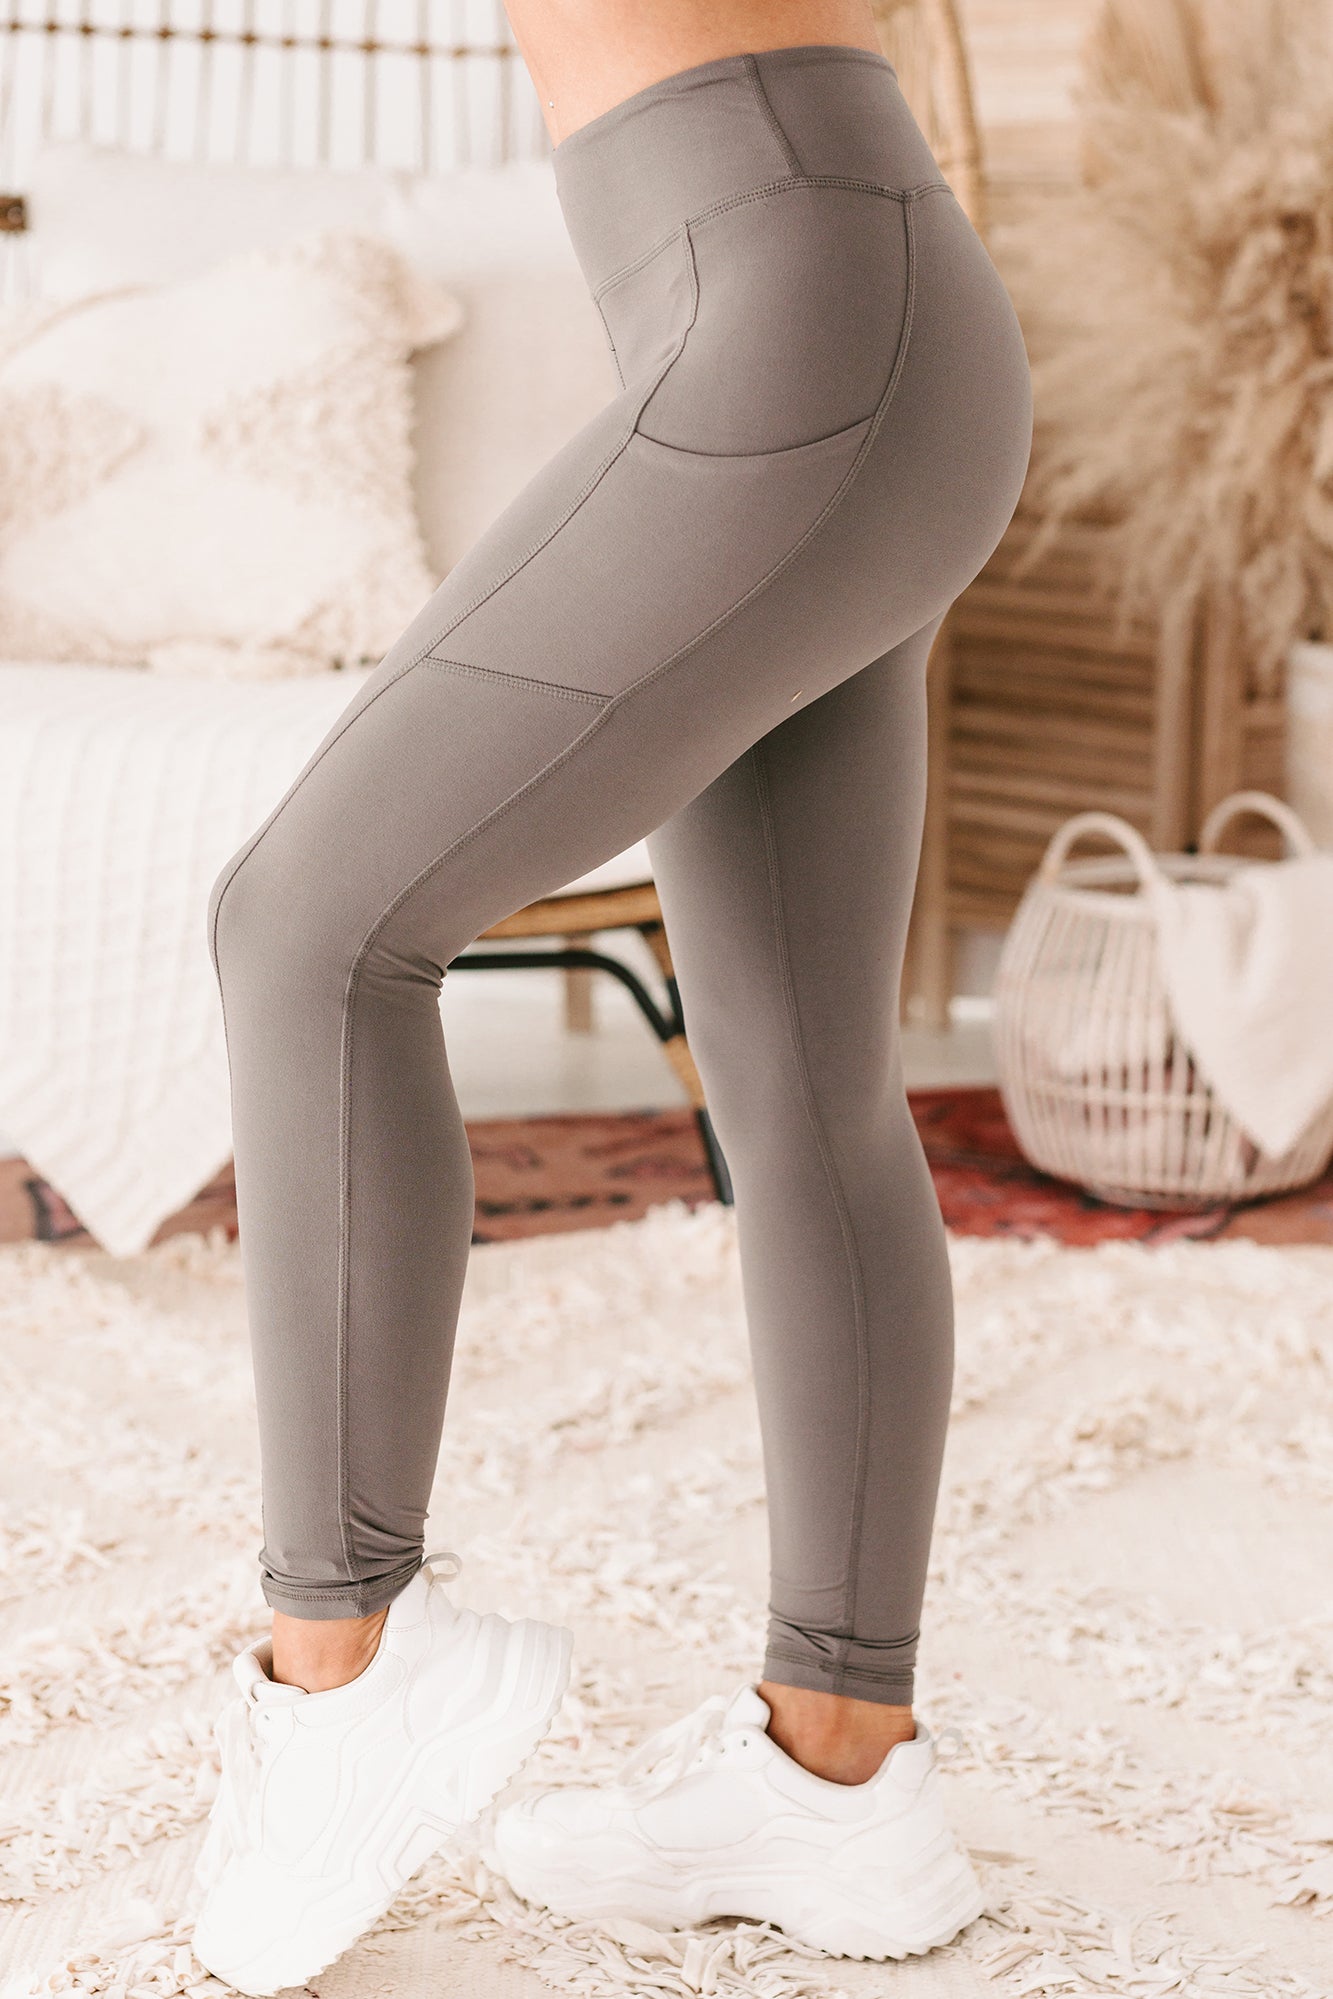 MVP Moves Buttery Soft Thigh Pocket Leggings (Frosted Mulberry)